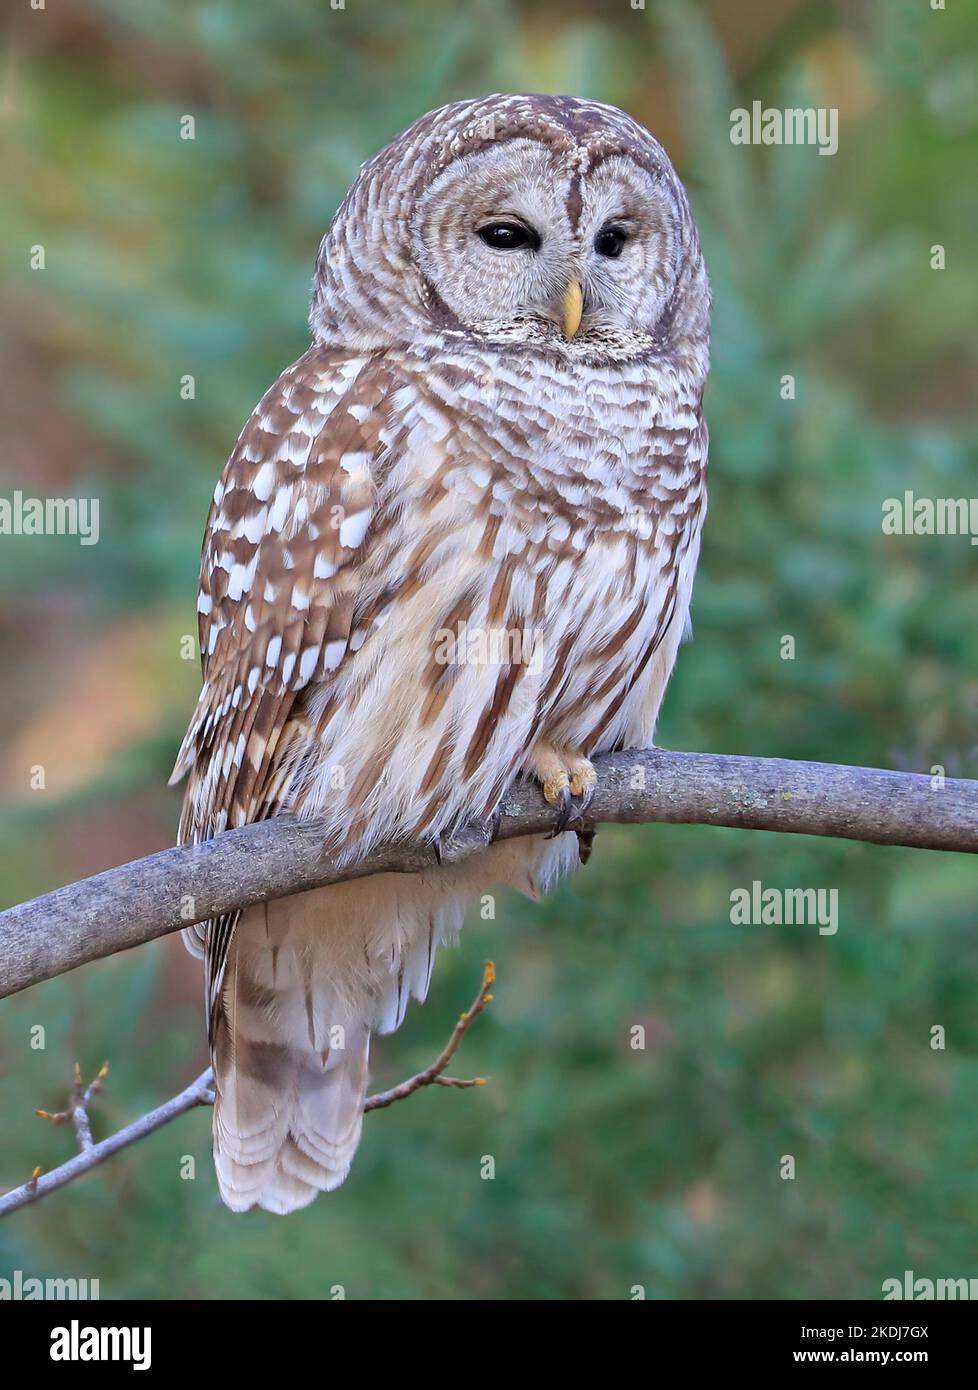 Barred Owl standing on a tree branch with green background, Quebec, Canada Stock Photo